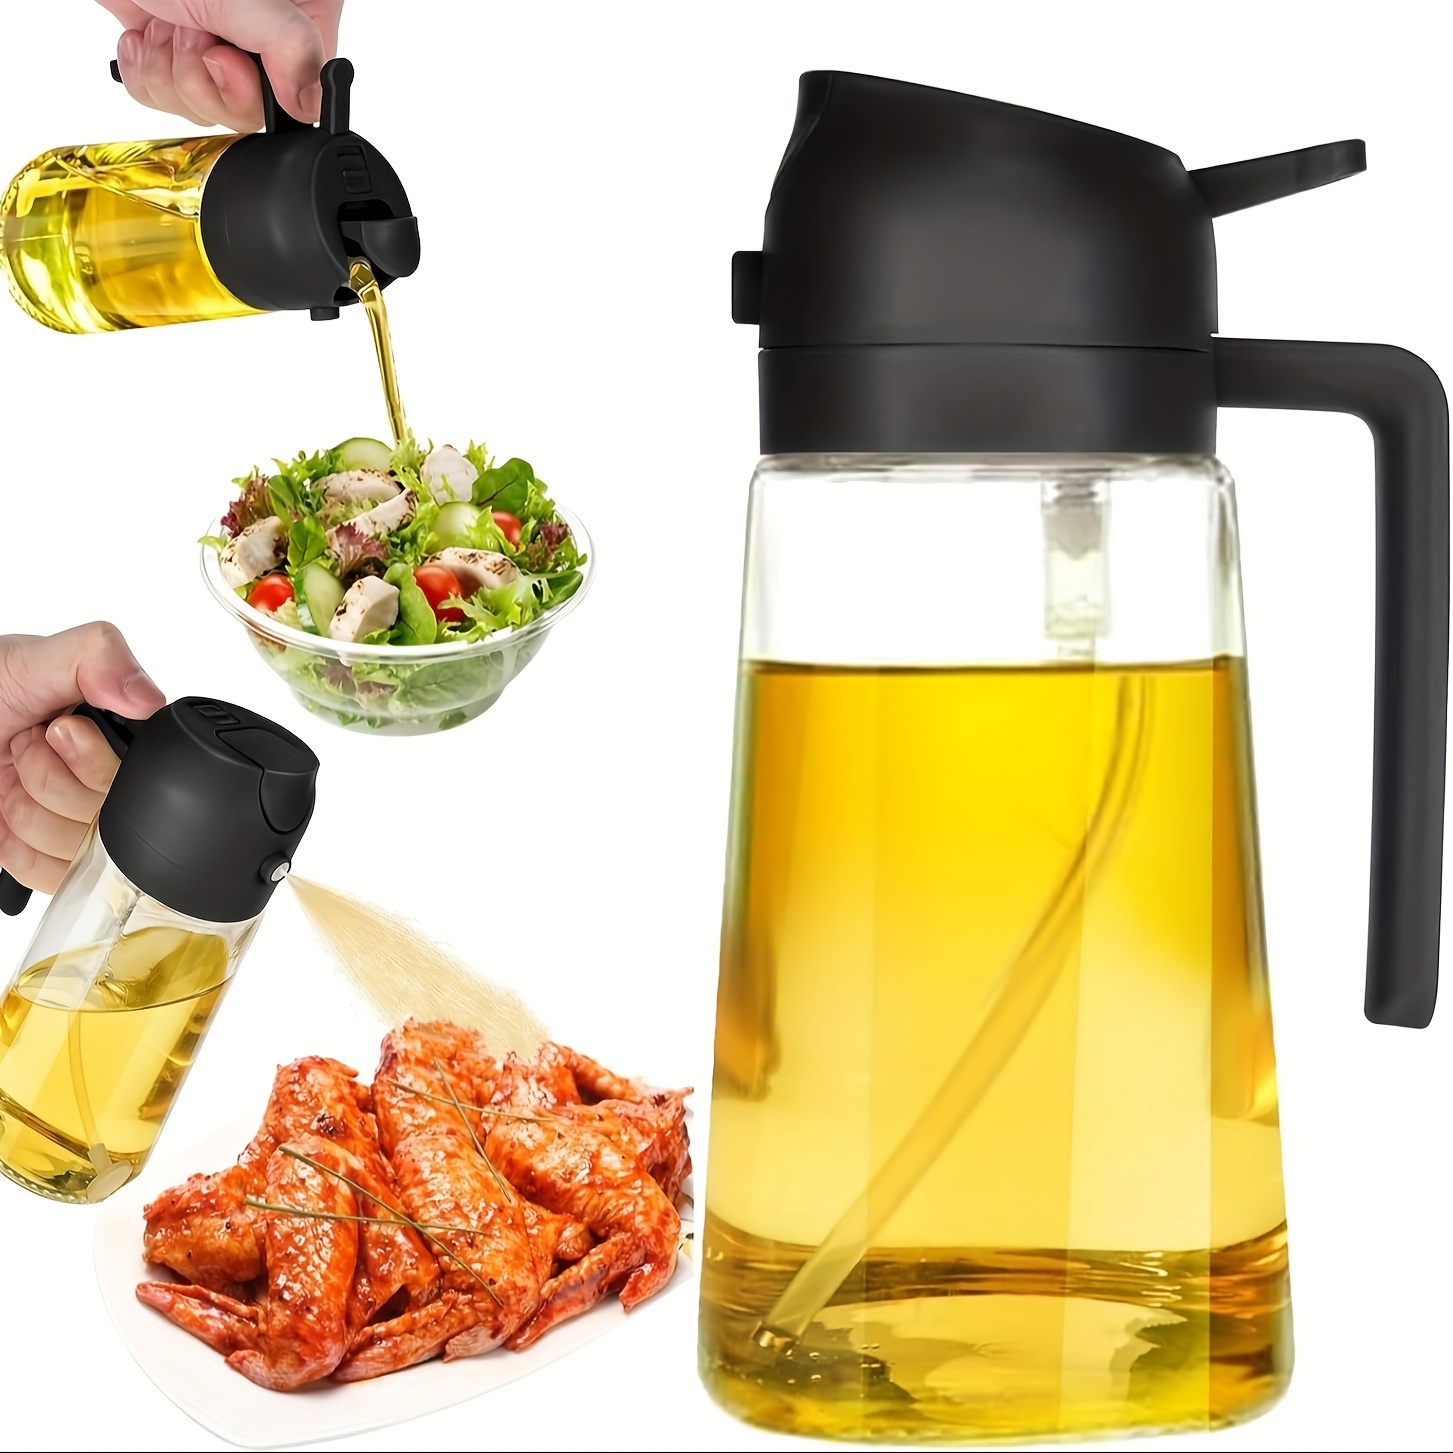 

Bpa-free Glass Oil Dispenser Bottle 470ml - Round Hand-wash Olive Sprayer 2-in-1 With Anti-clog Filter And Gravity Lid For Cooking, Baking, Grilling, Salads